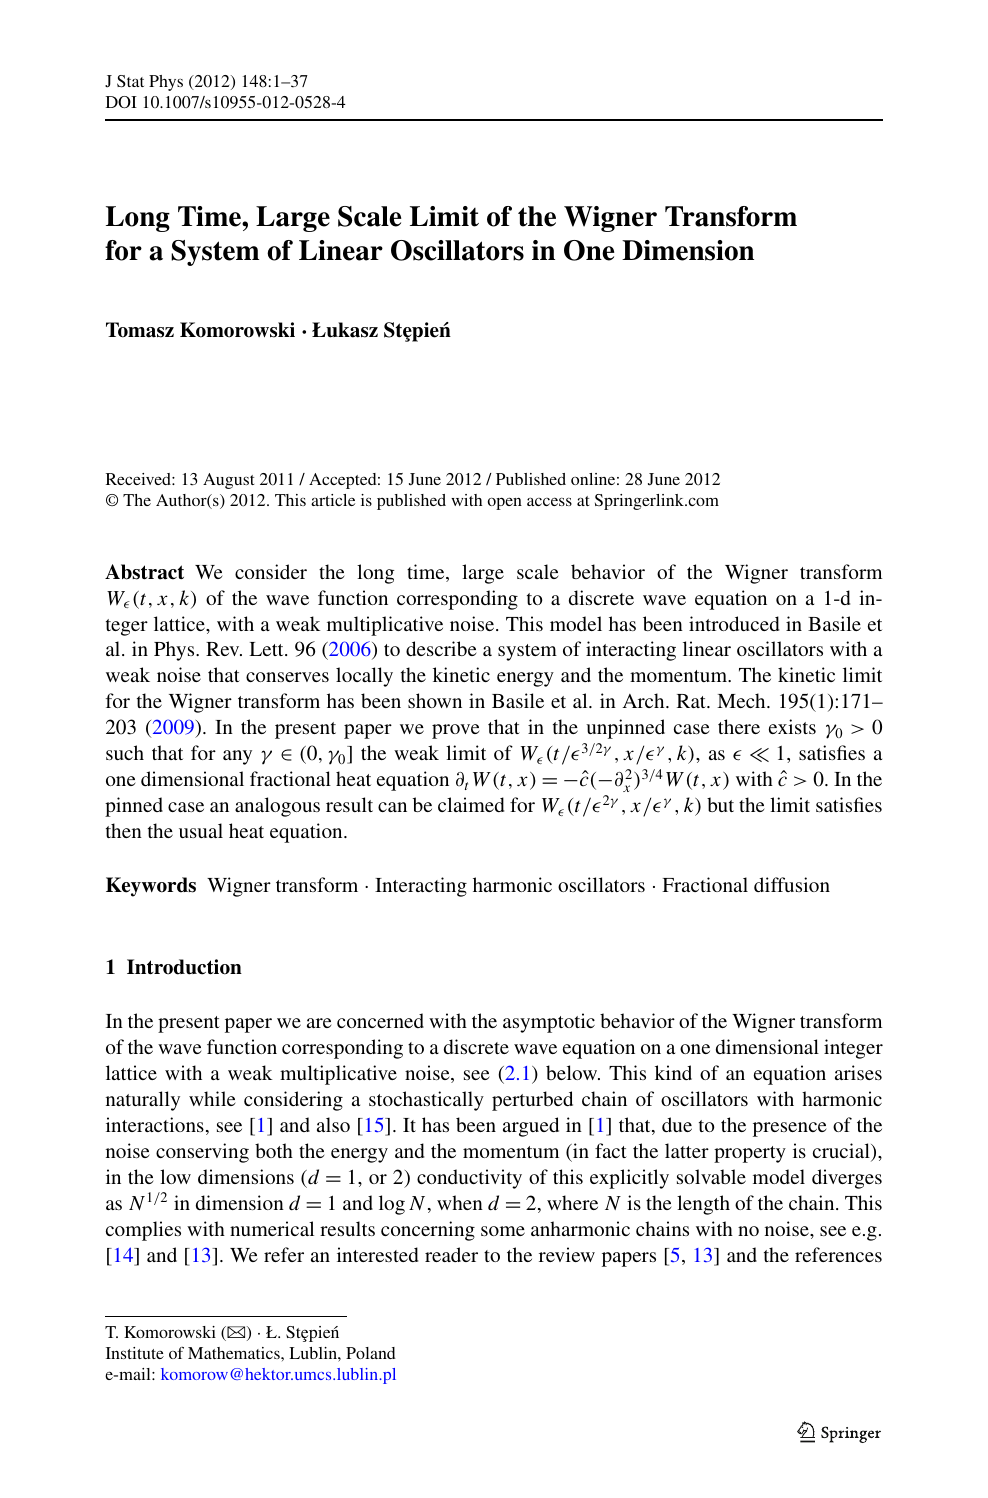 Long Time Large Scale Limit Of The Wigner Transform For A System Of Linear Oscillators In One Dimension Topic Of Research Paper In Mathematics Download Scholarly Article Pdf And Read For